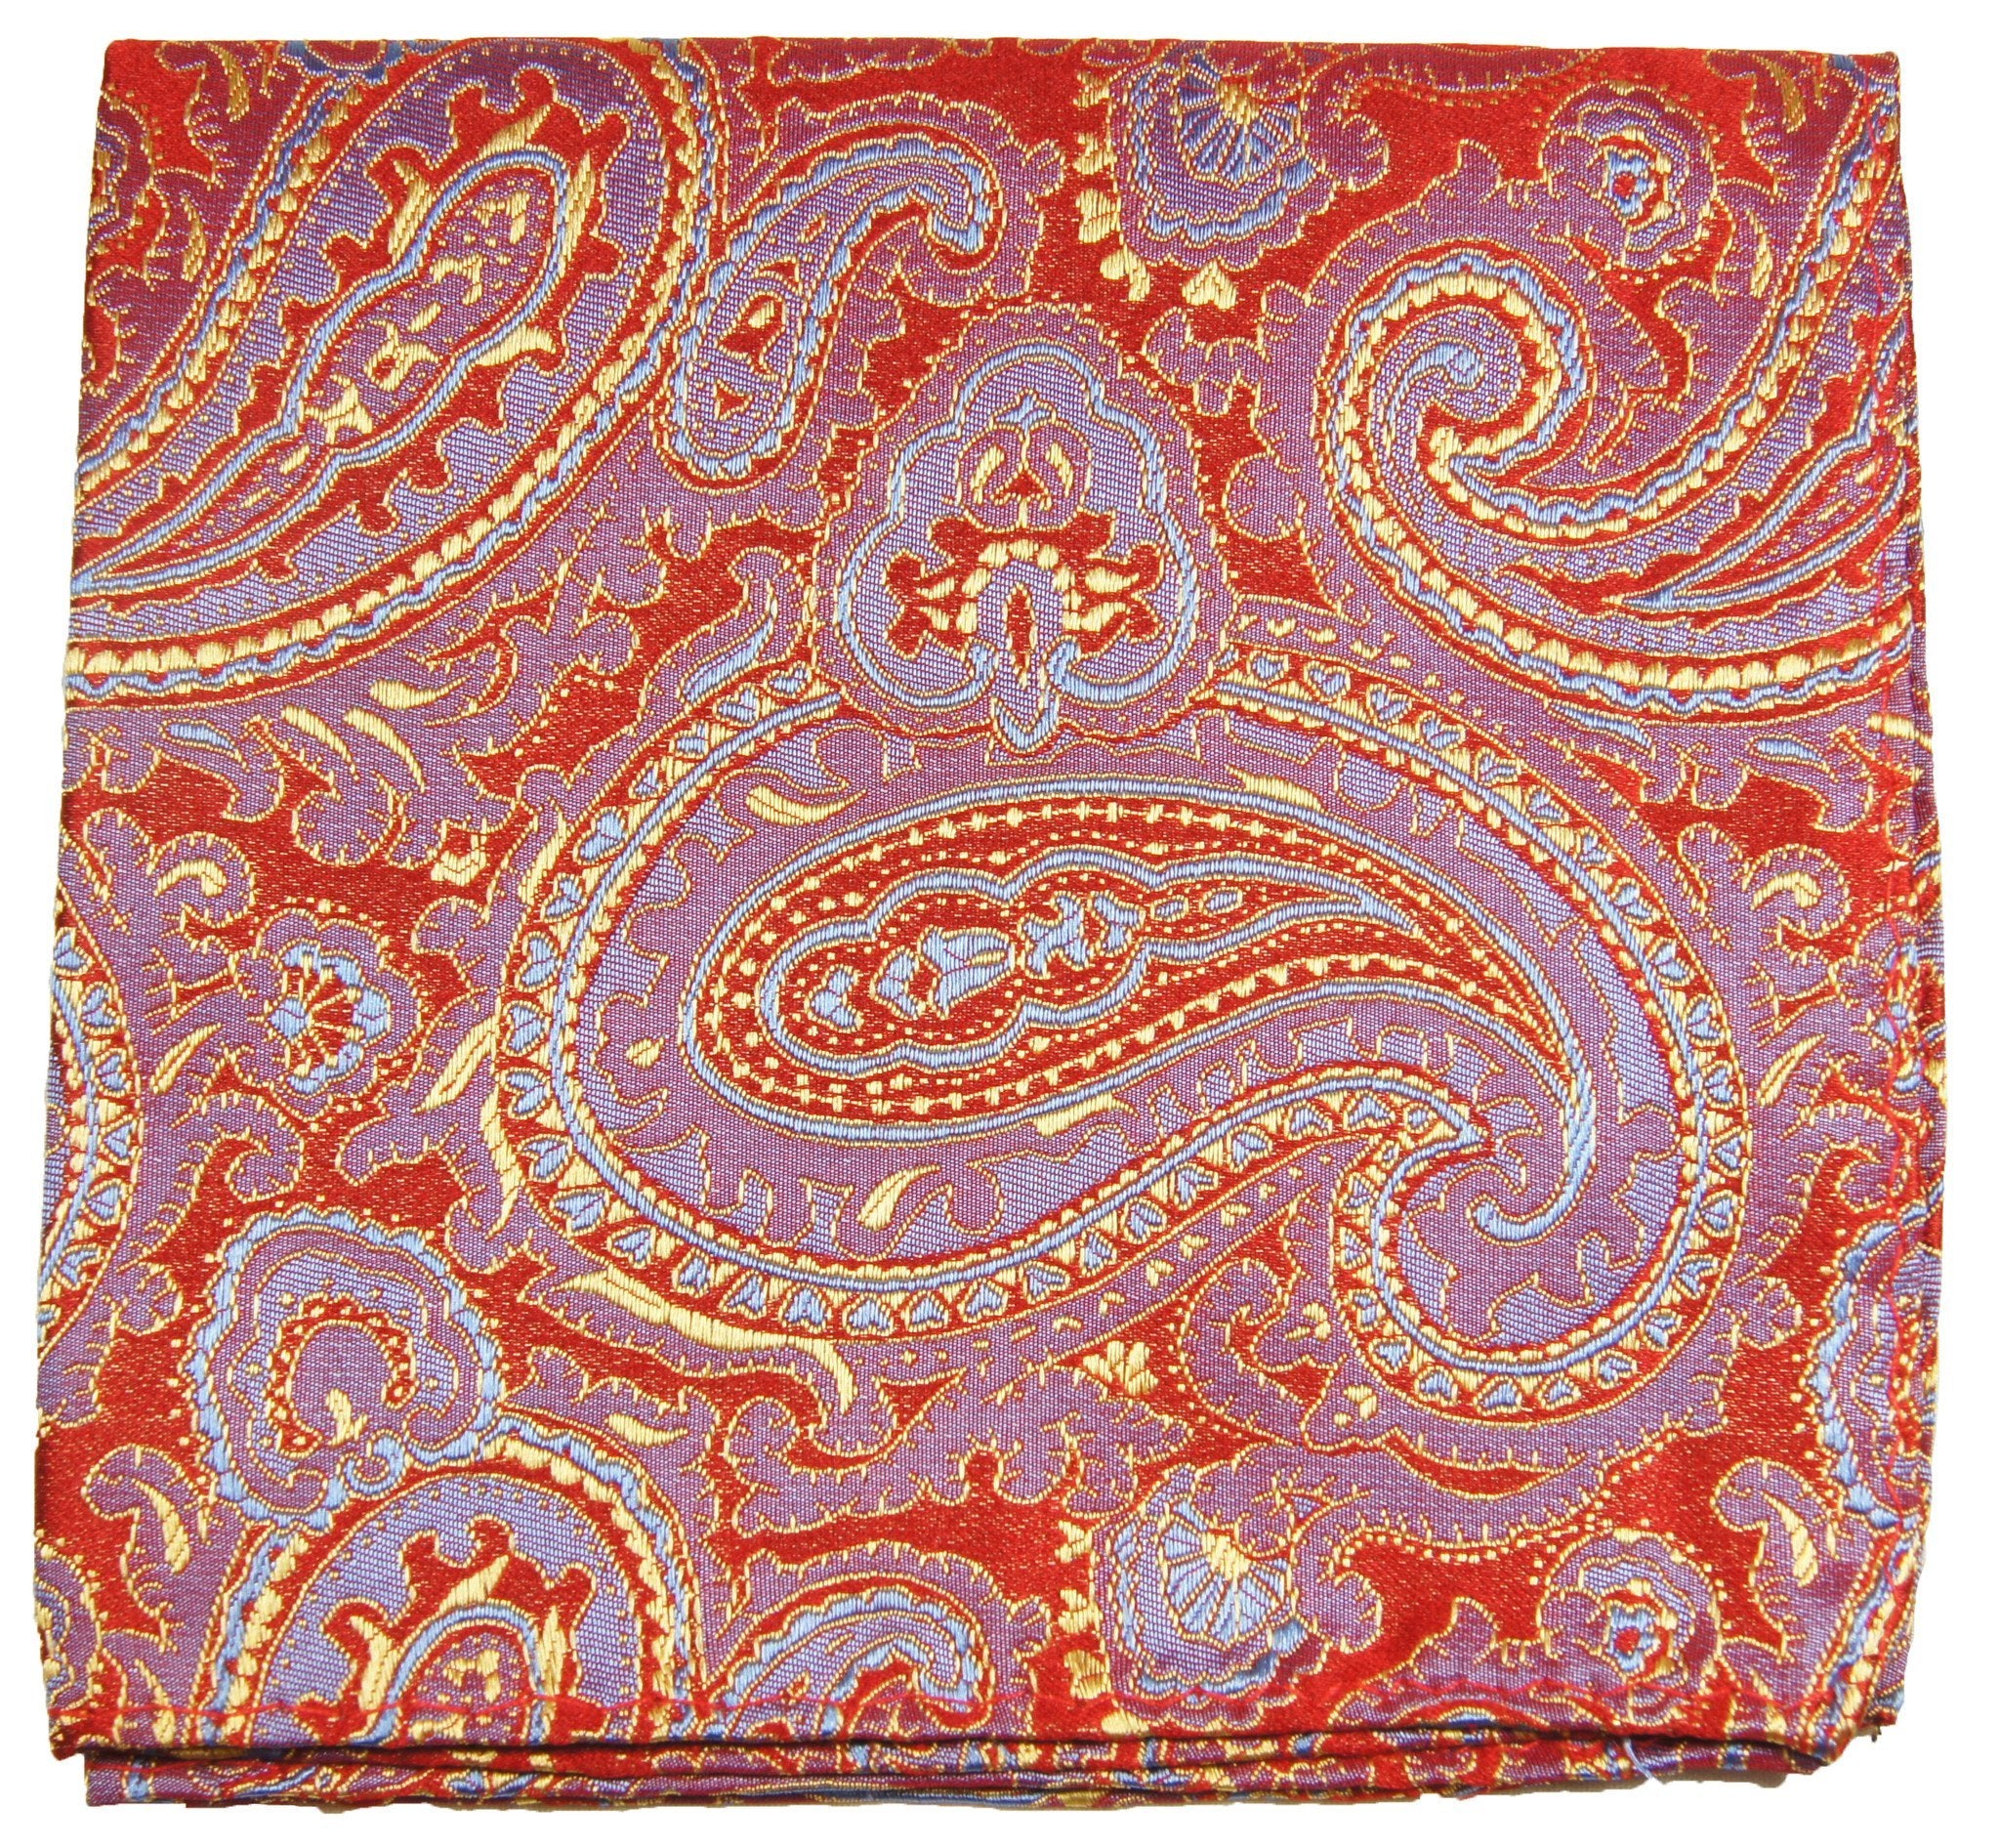 Red, Gold and Blue Paisley Silk Pocket Square | Paul Malone